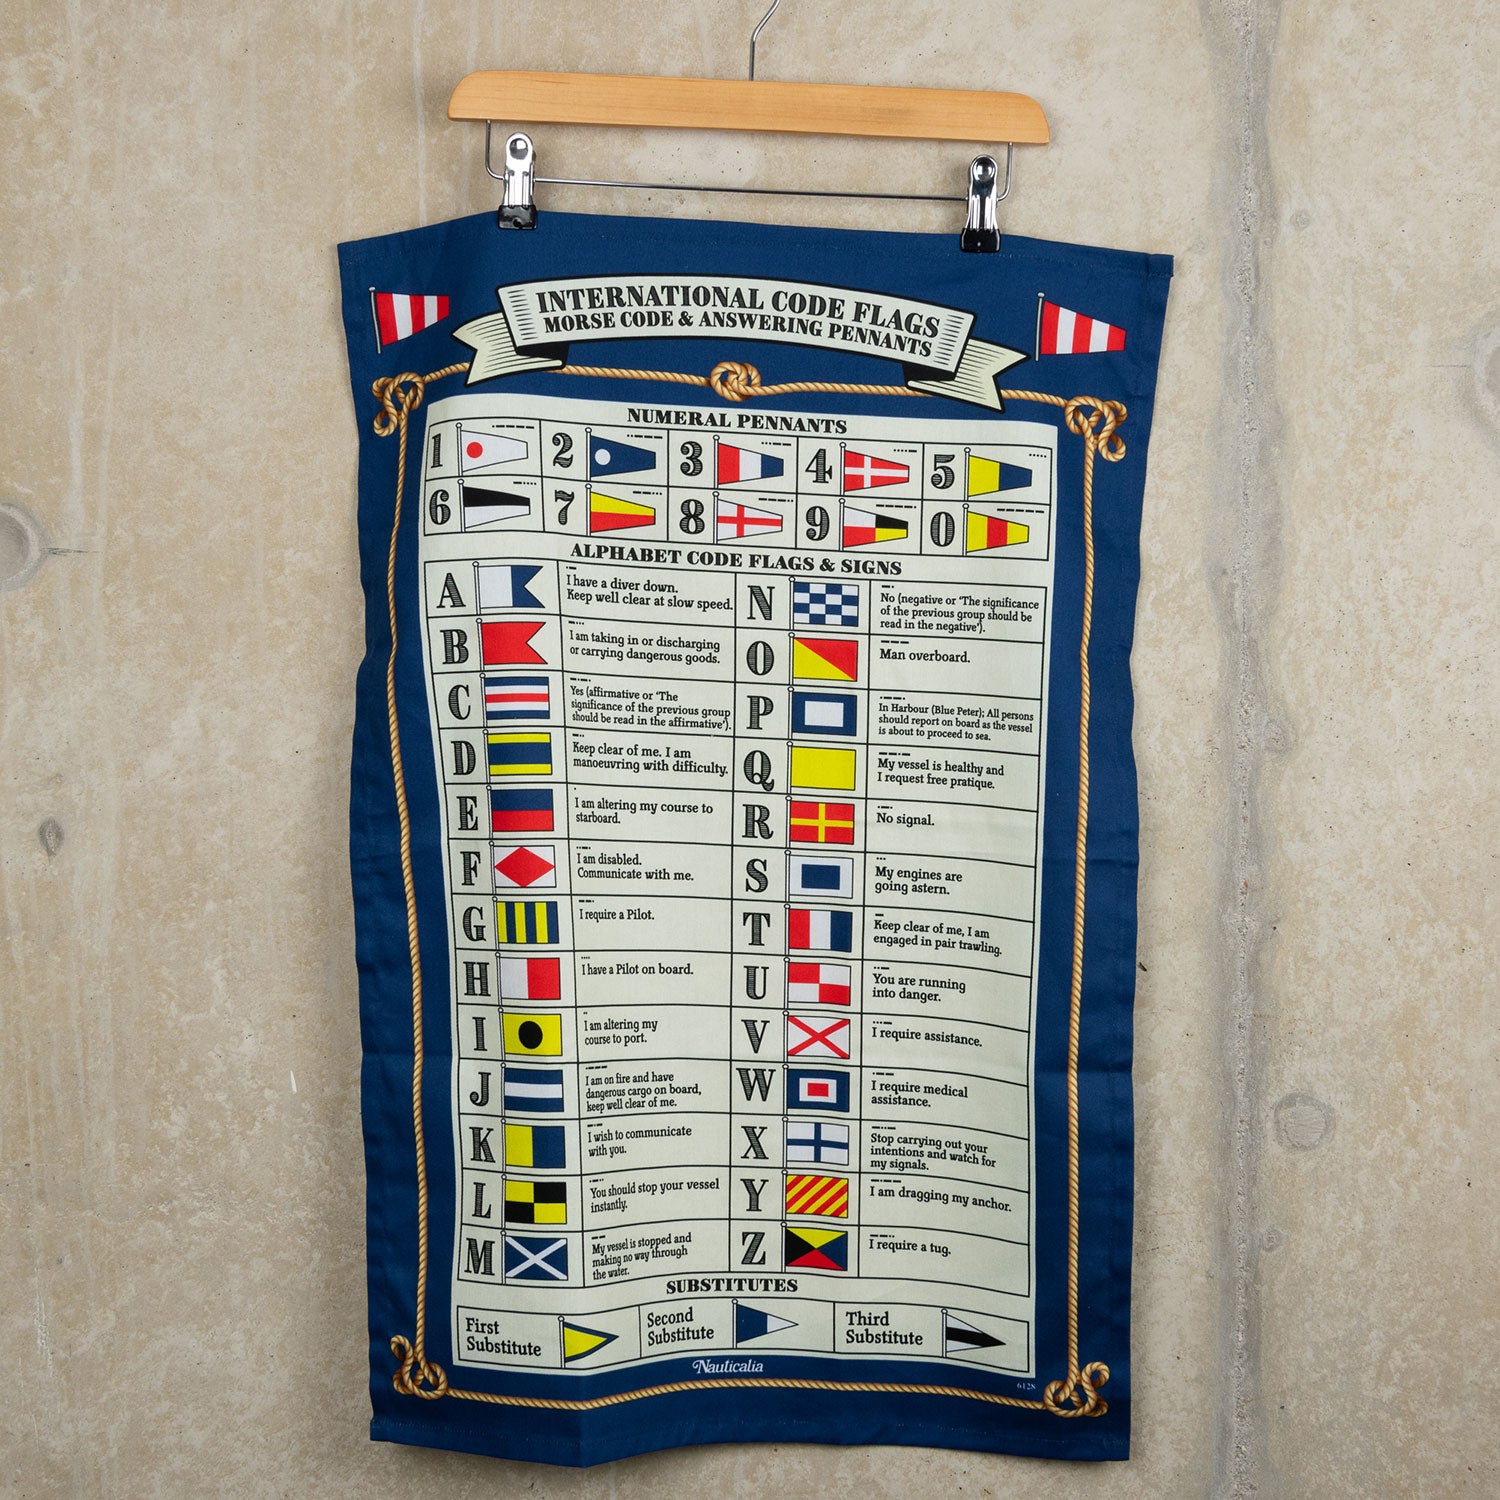 Multi-coloured international Code Flags tea towel with flags for each letter of the alphabet and for numbers 0 to 9. The tea towel is hanging from a hanger on a grey background.